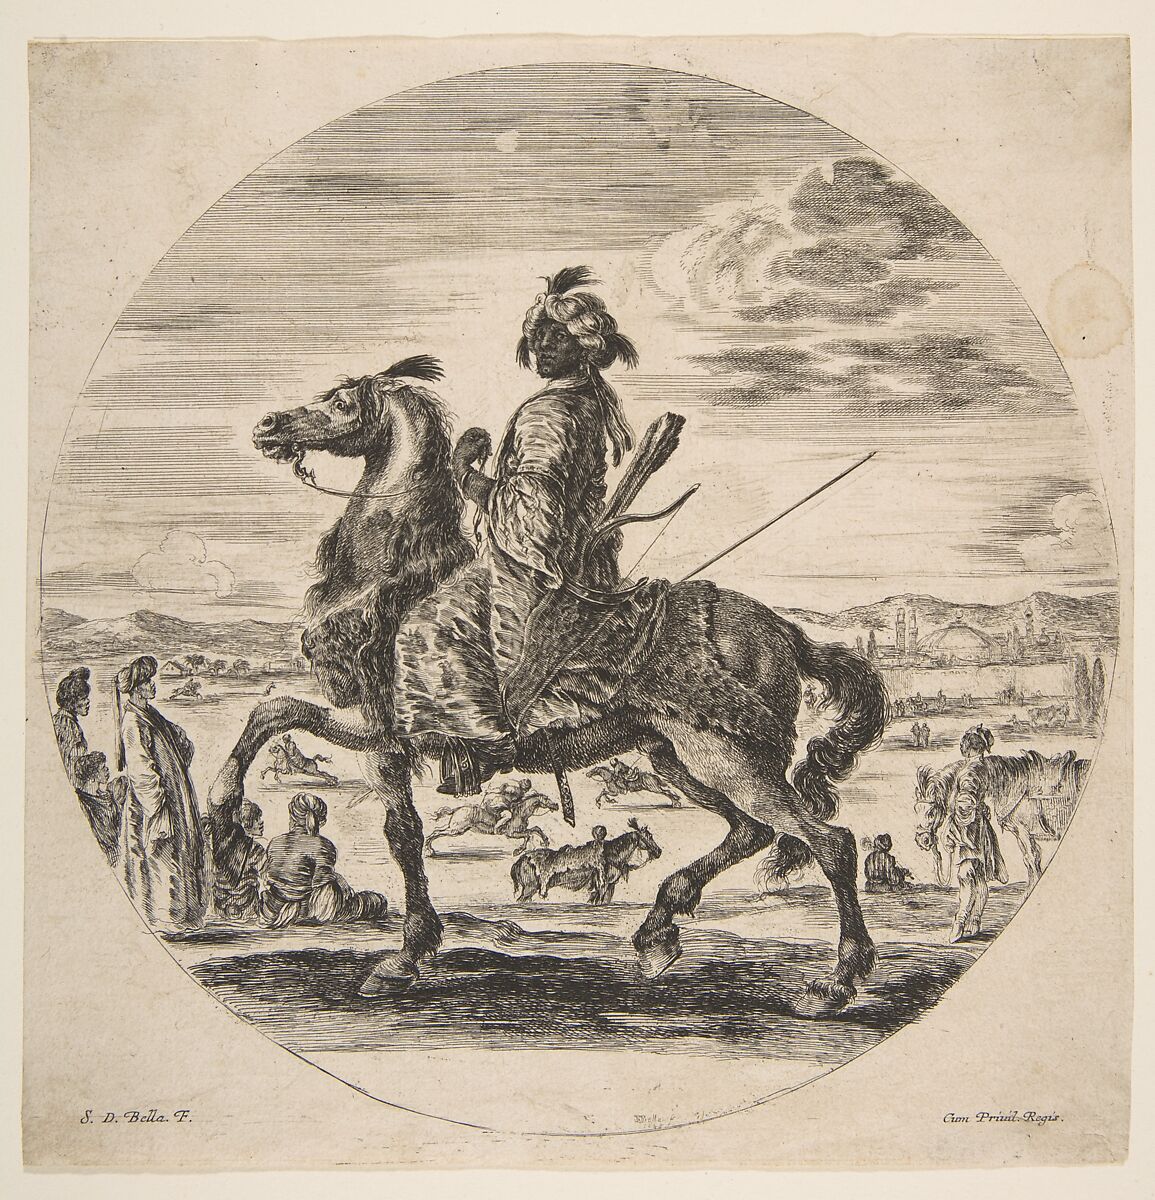 A Moorish horseman facing the left, standing and seated Turks in the middle ground, and other horsemen in the background, from 'Figures on Horseback' (Cavaliers nègres, polonais et hongrois), Stefano della Bella (Italian, Florence 1610–1664 Florence), Etching 